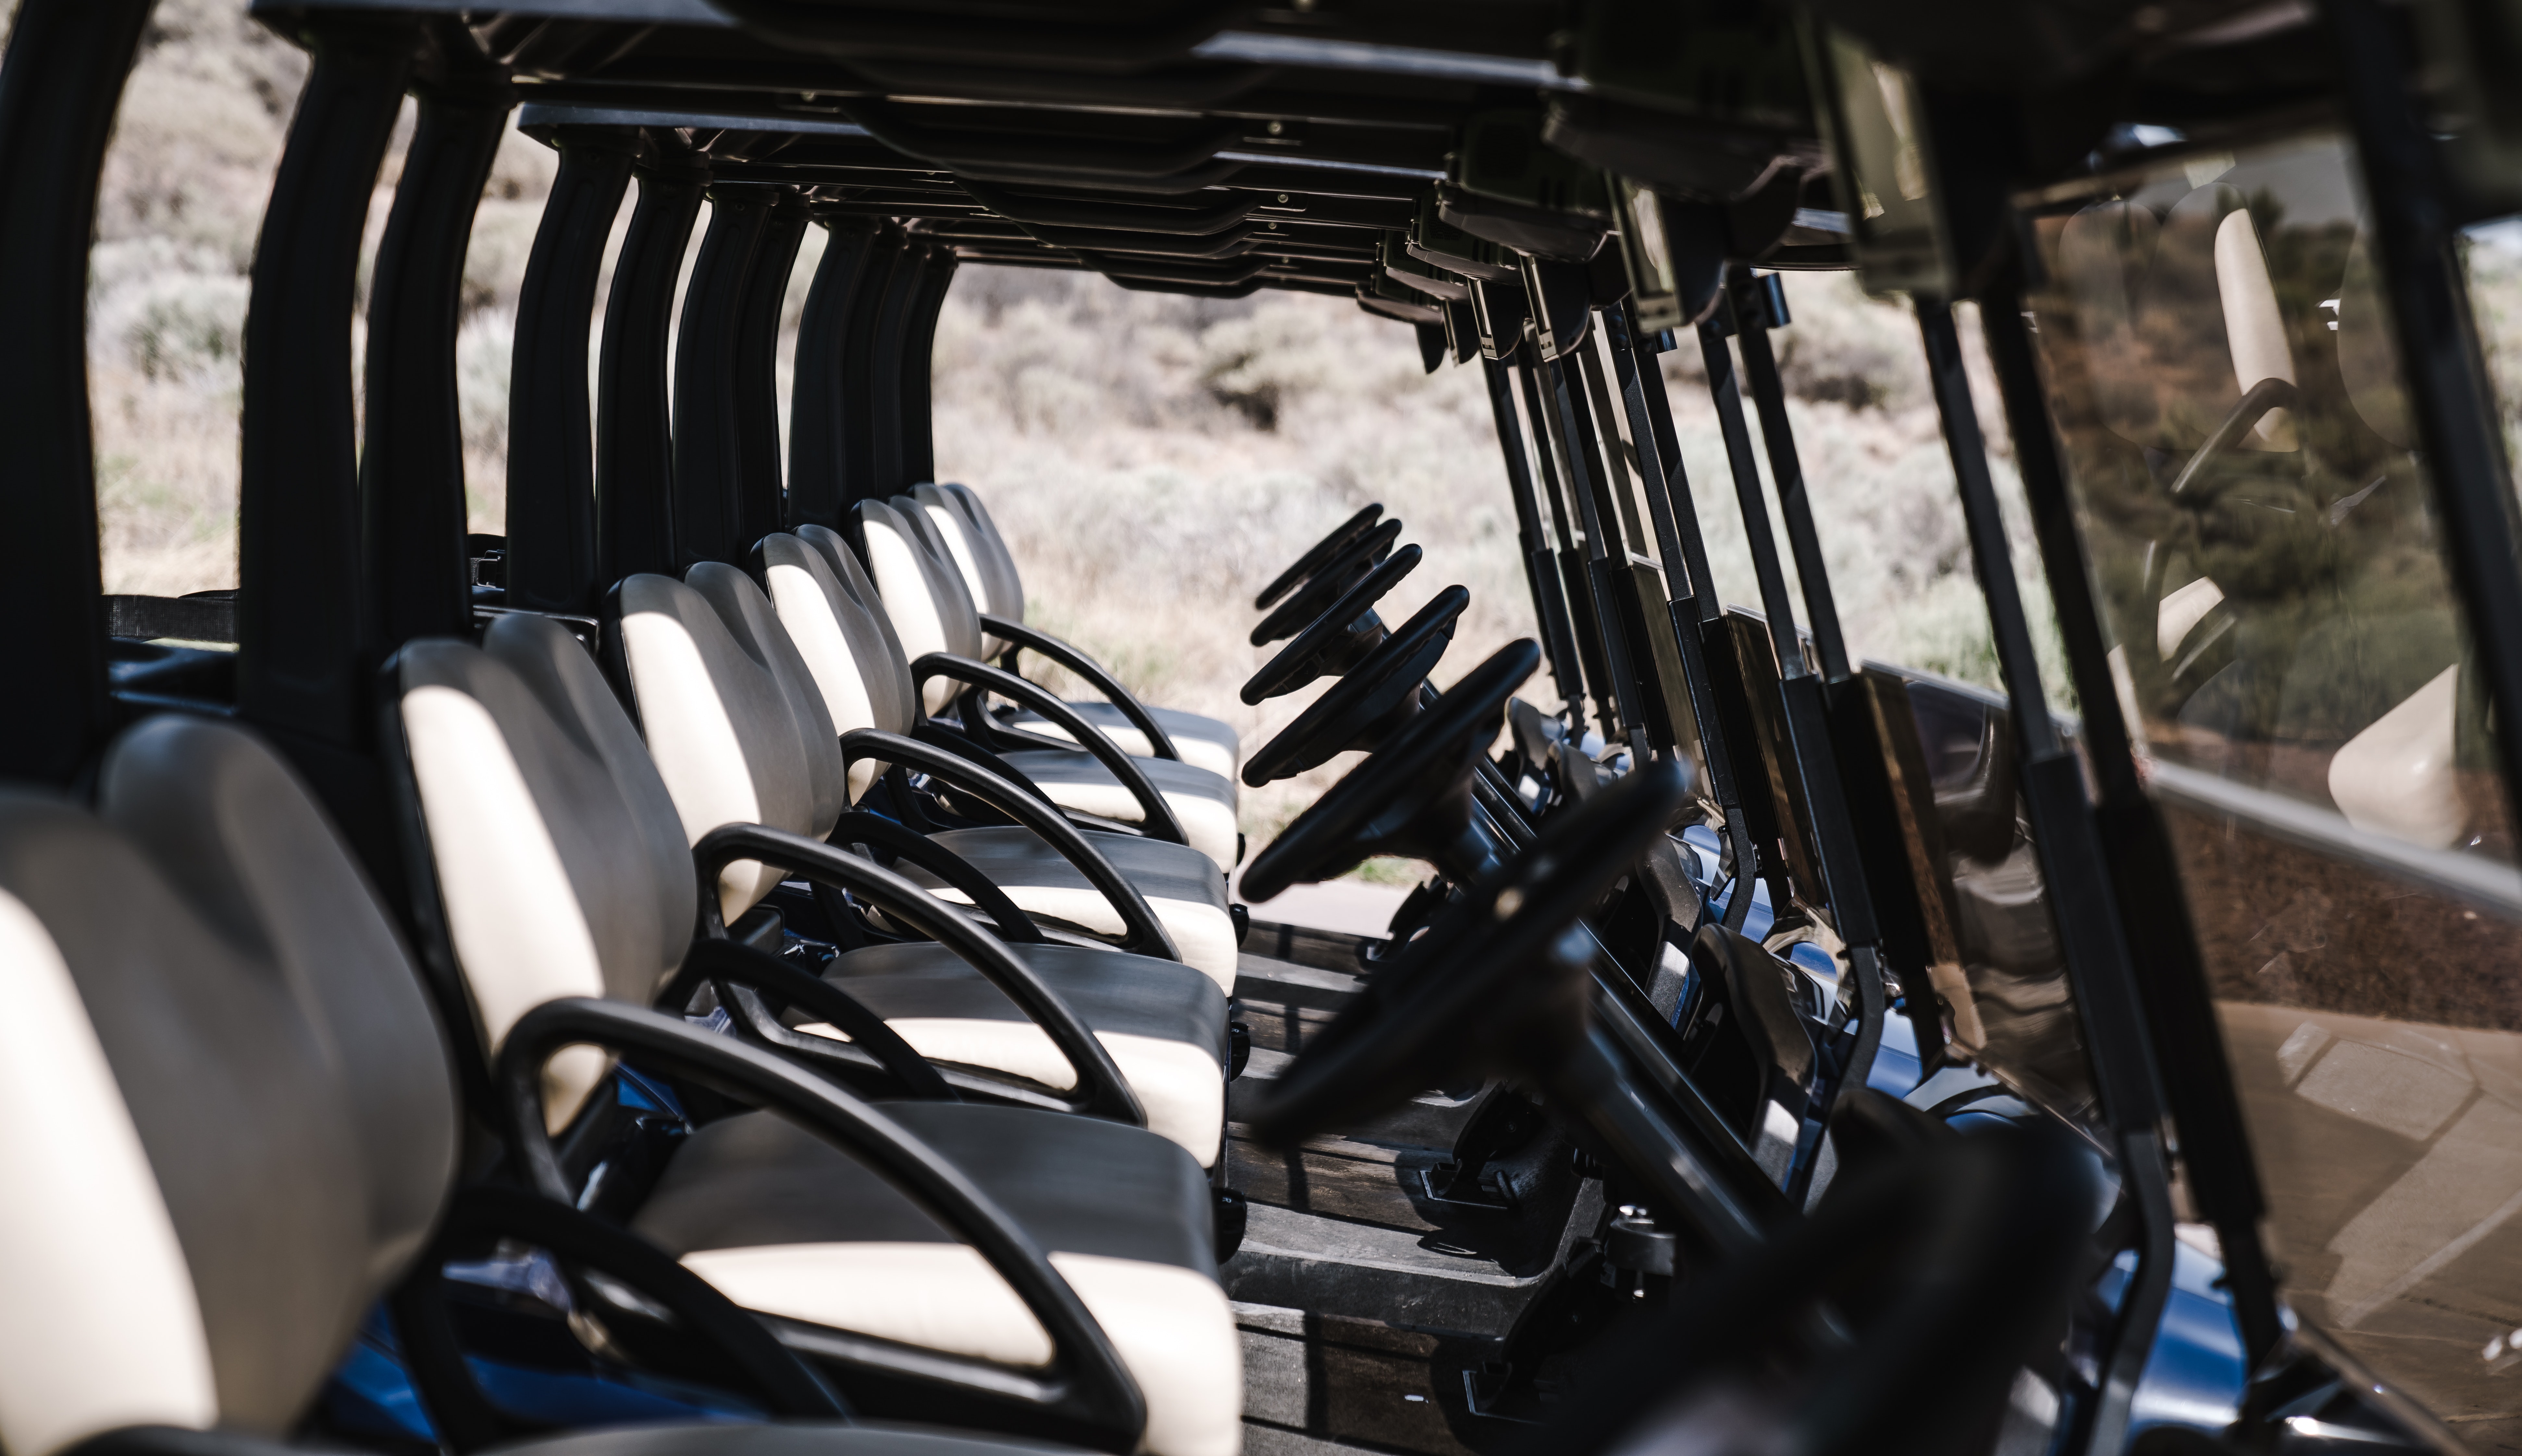 Shot through ATVs lined up with view of the seats and steering wheels
